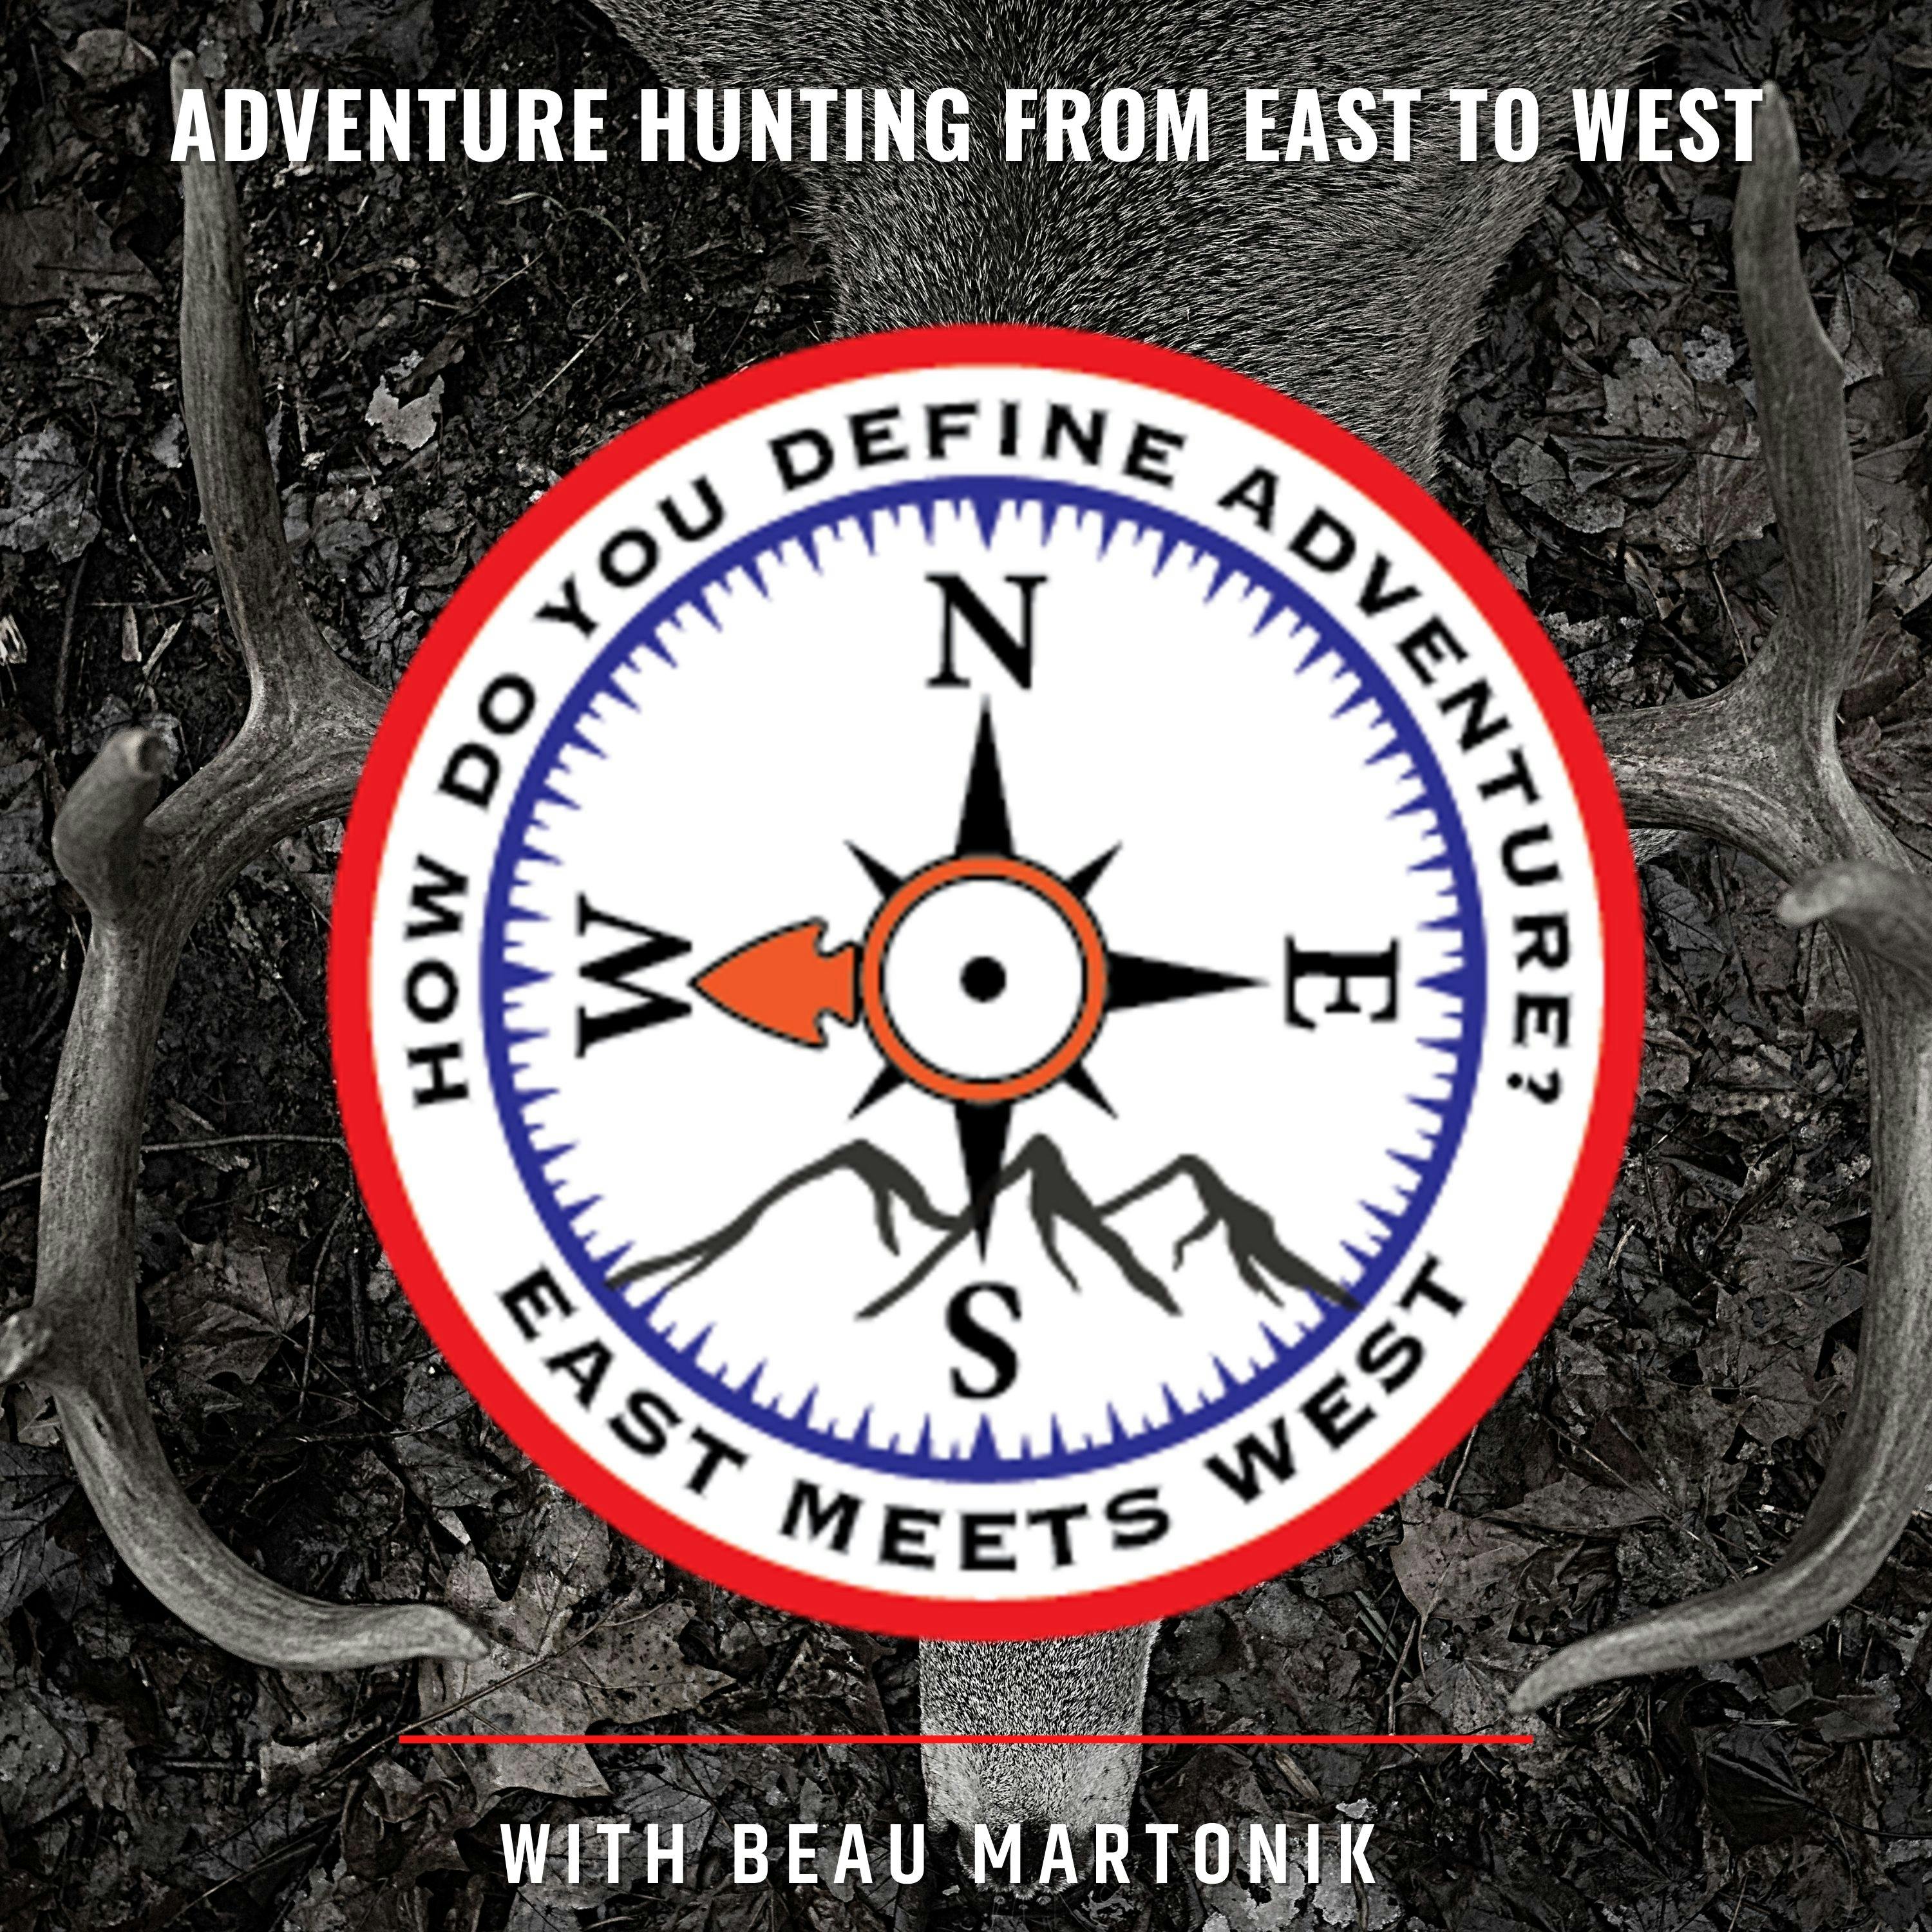 Ep. 304: Finding the Right HABITAT & Analyzing Buck Sign with Paul Putera - Pt. 1